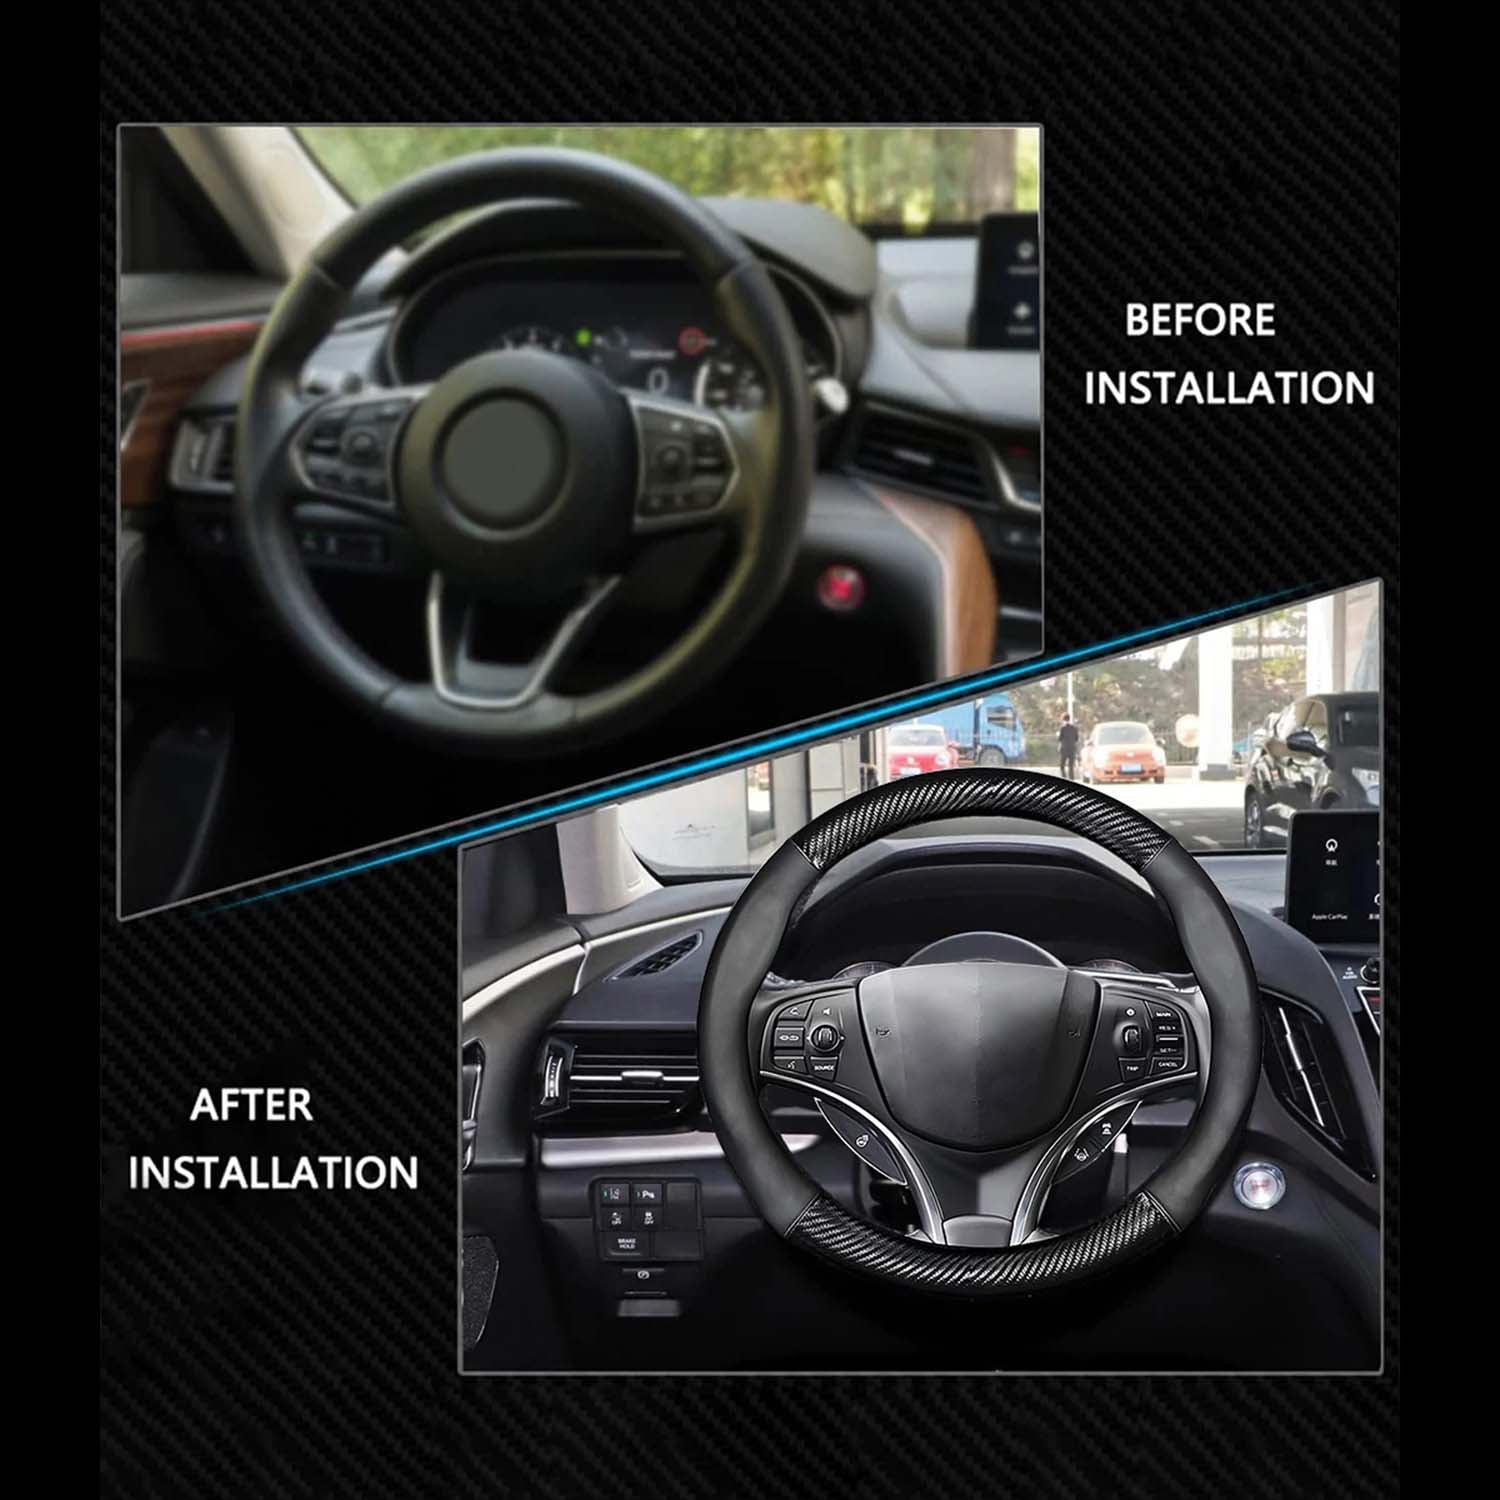 Car Steering Wheel Cover, Custom For Your Cars, Leather Nonslip 3D Carbon Fiber Texture Sport Style Wheel Cover for Women, Interior Modification for All Car Accessories SU18992